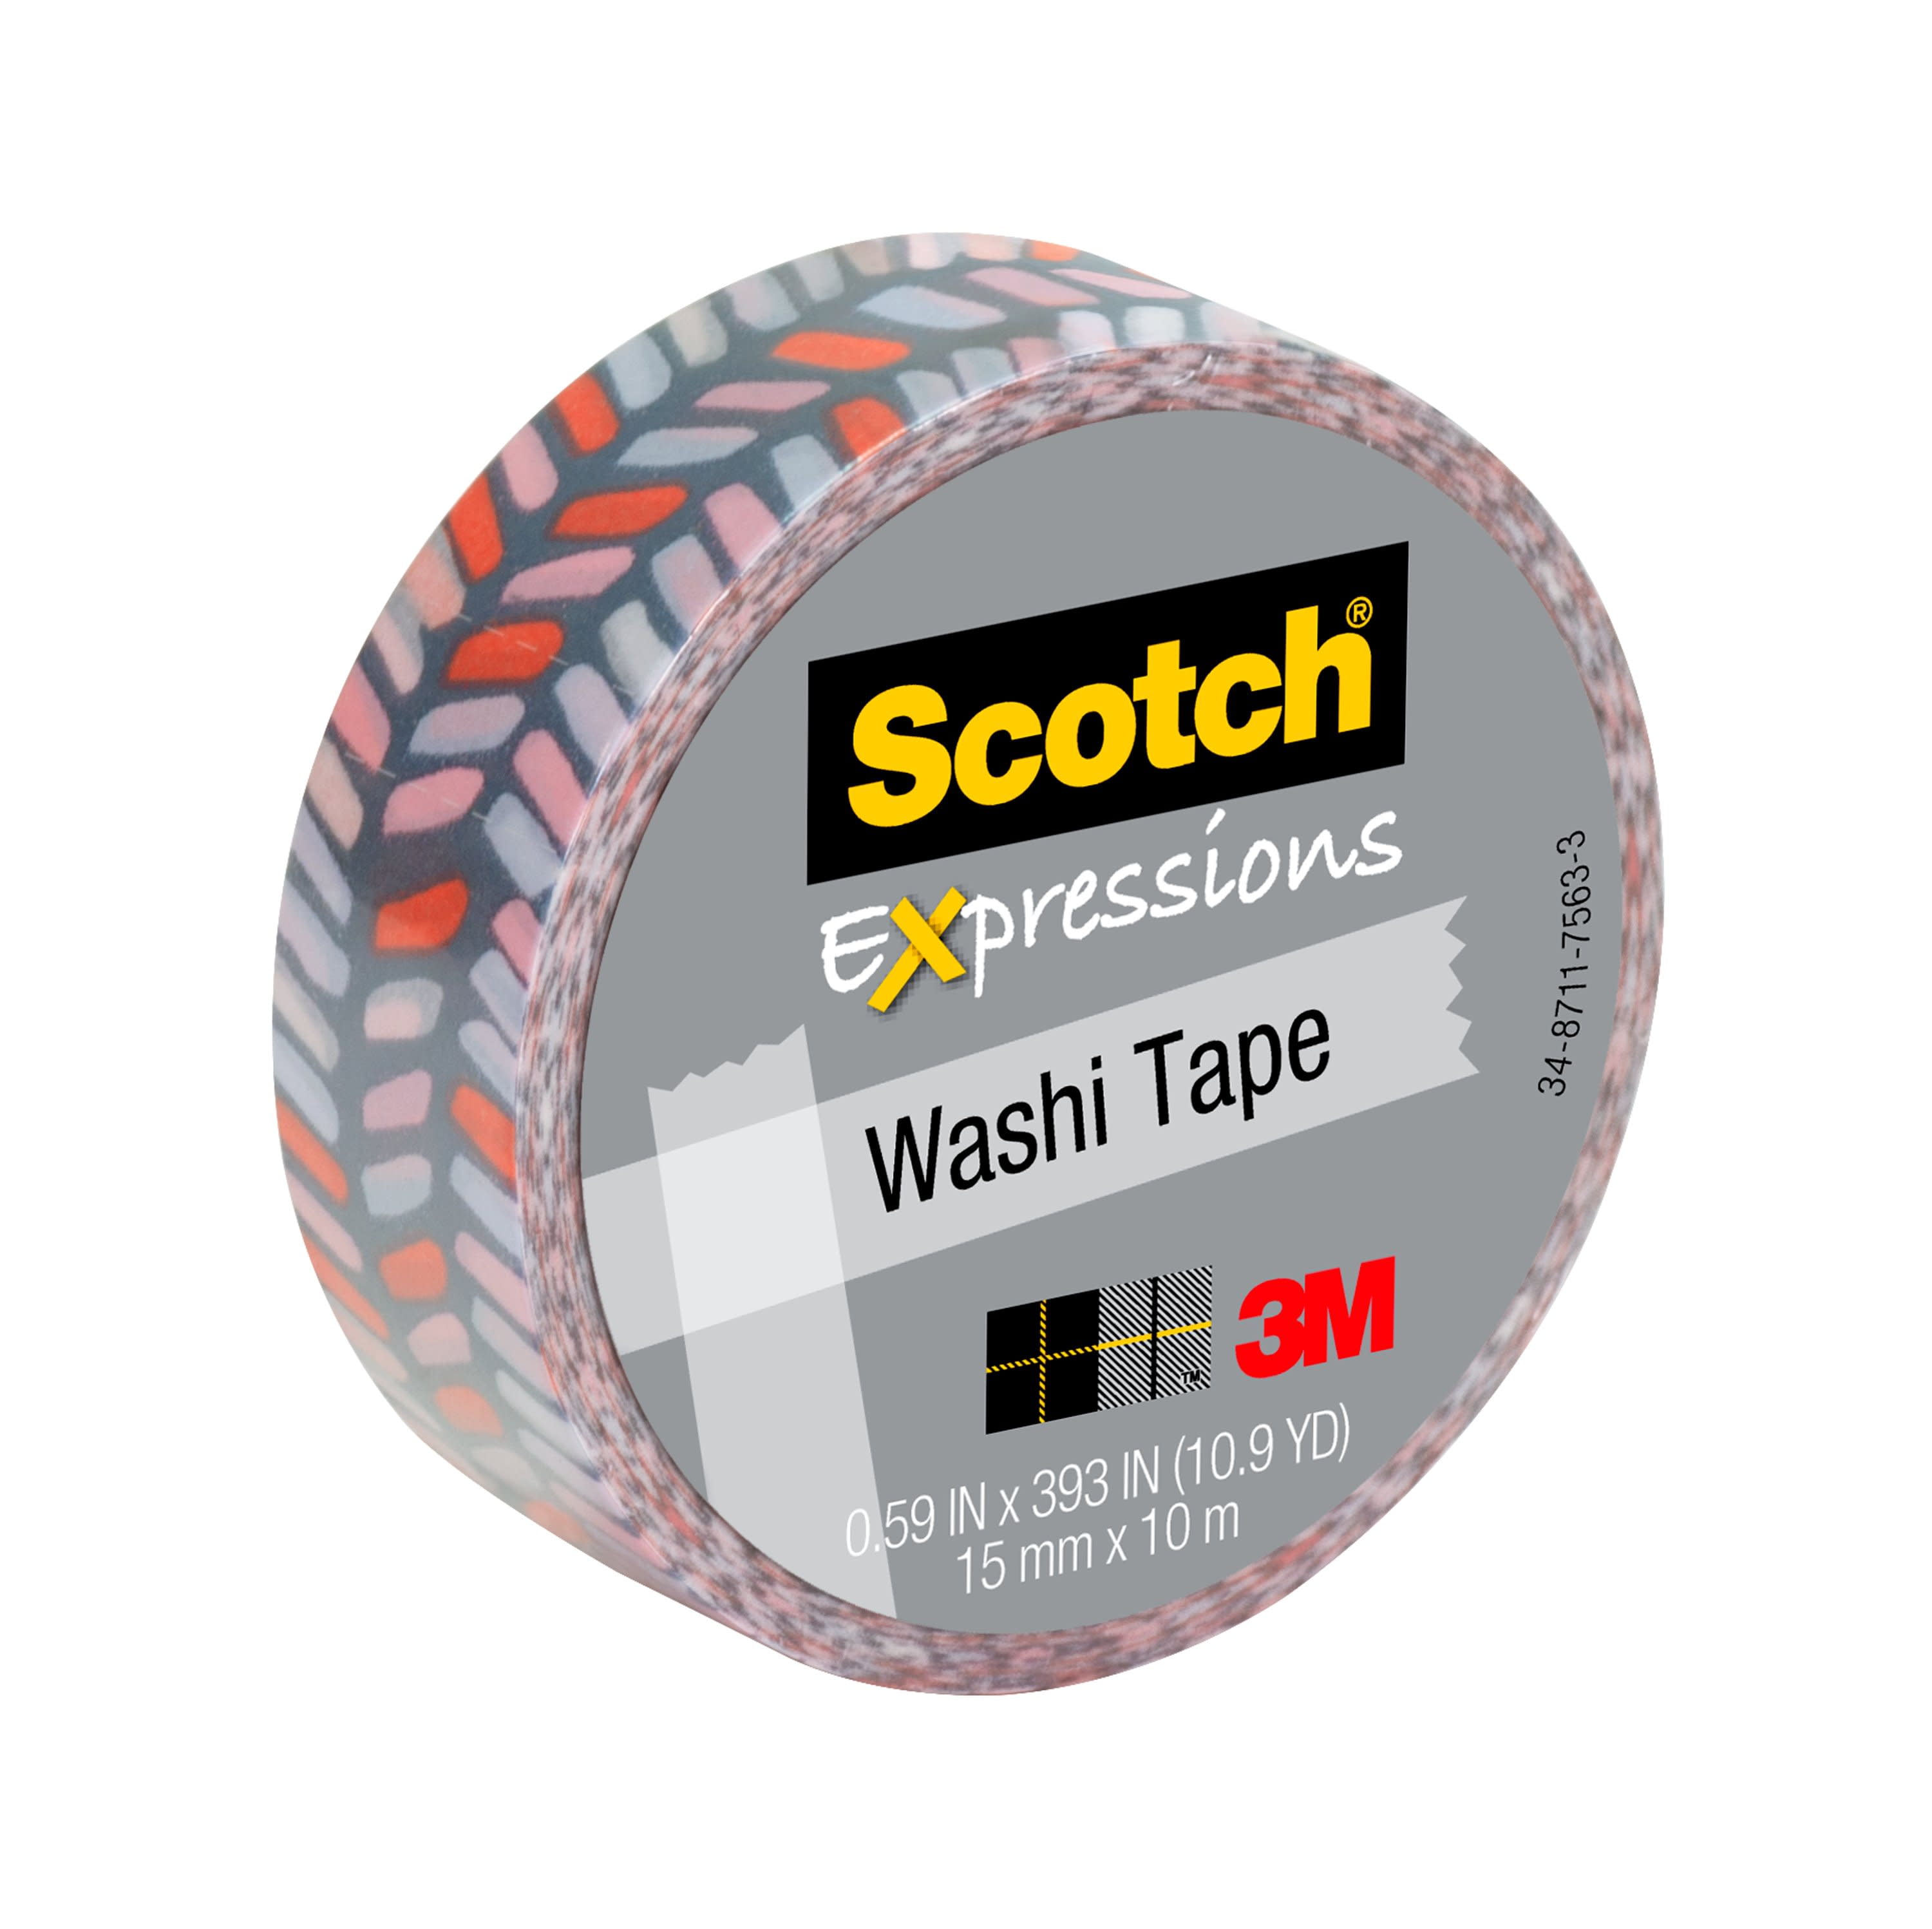 From the brand you trust for all things tape, Scotch Brand brings